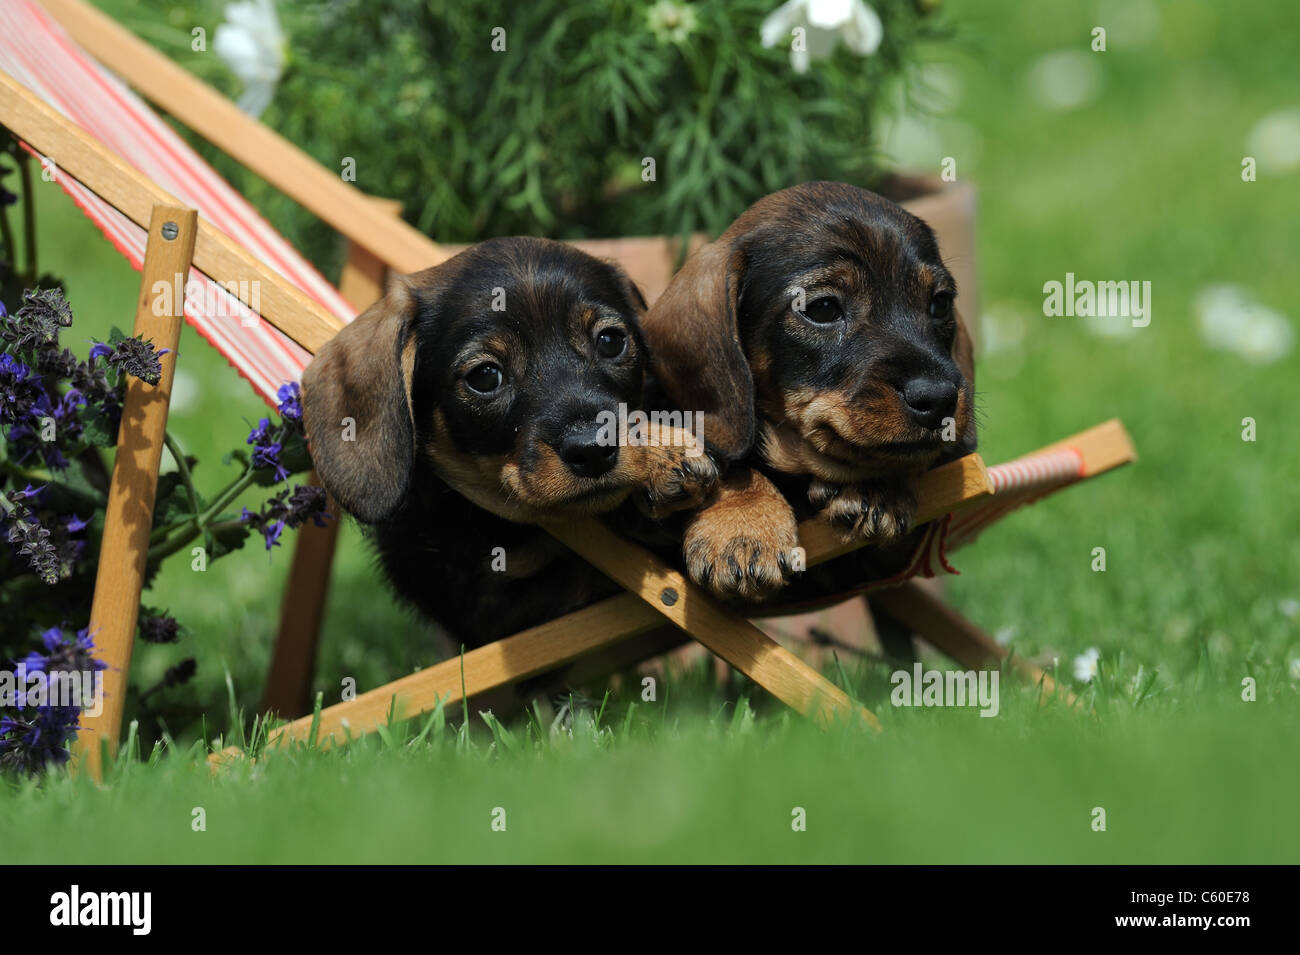 Wire-haired Dachshund (Canis lupus familiaris). Two puppies in a dolls deckchair in a flowering garden. Stock Photo